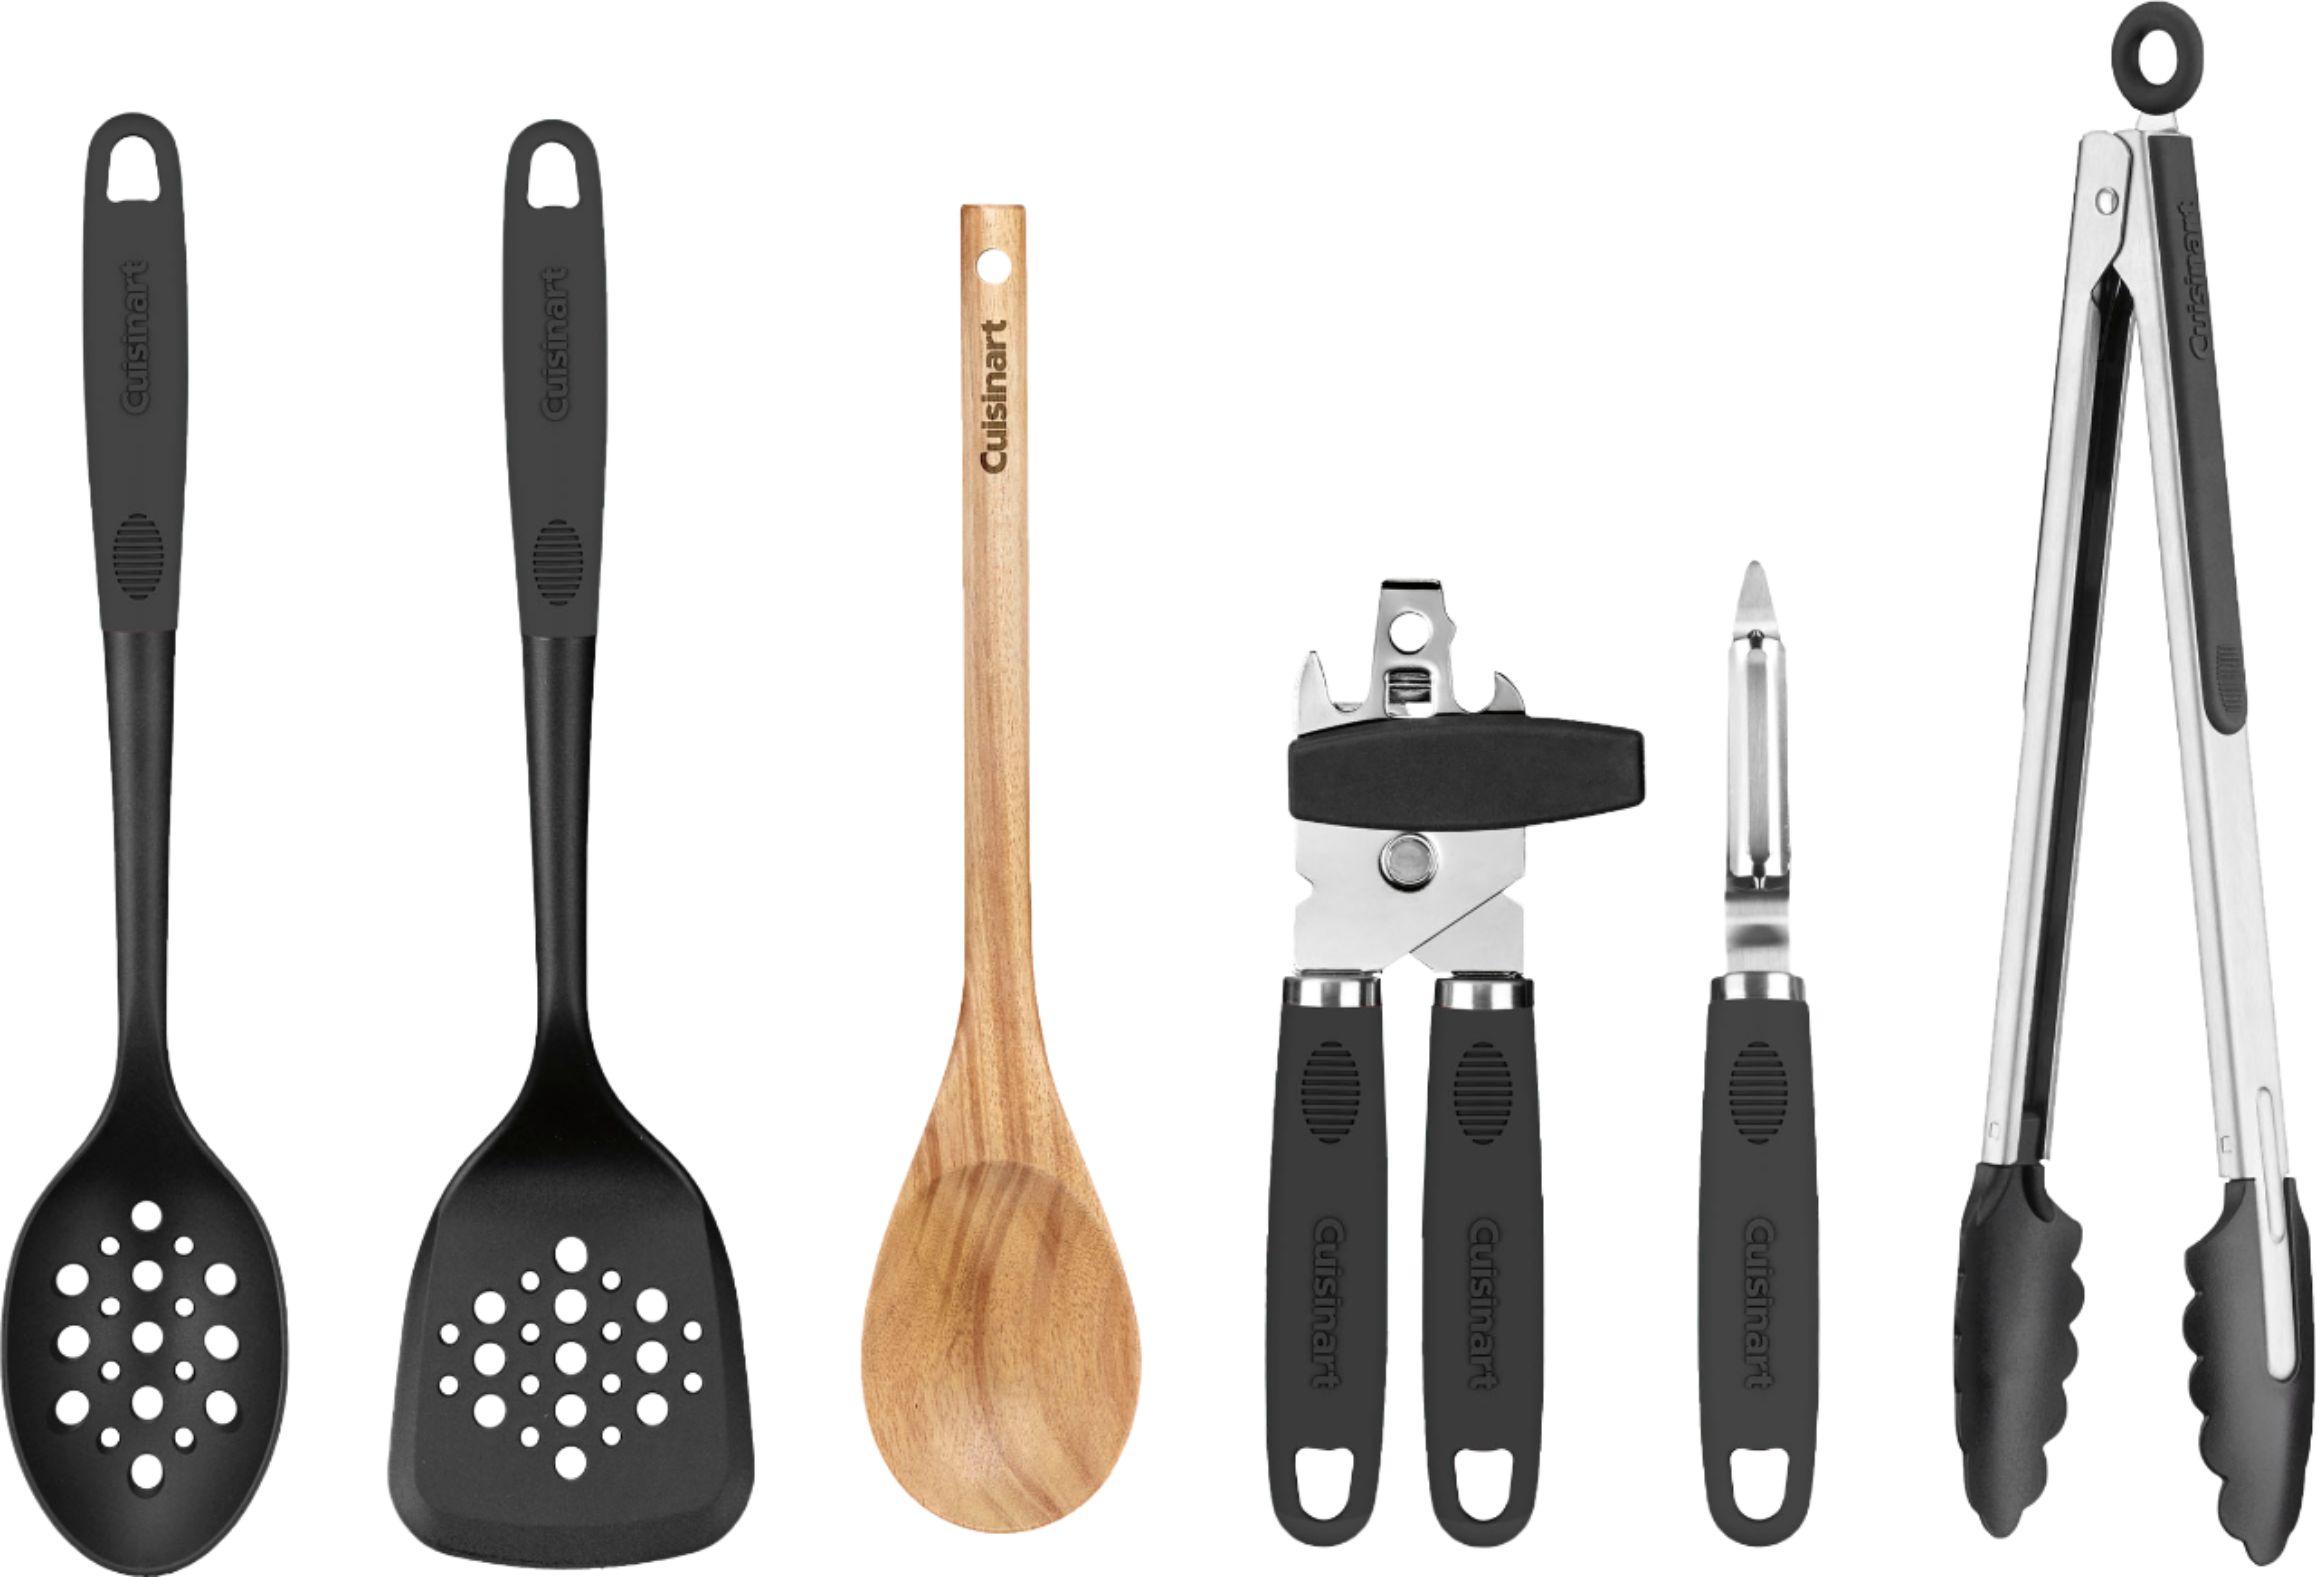 6-Piece Cuisinart Tool and Gadget Set Indoor Cooking Utensils for $12.99 Shipped